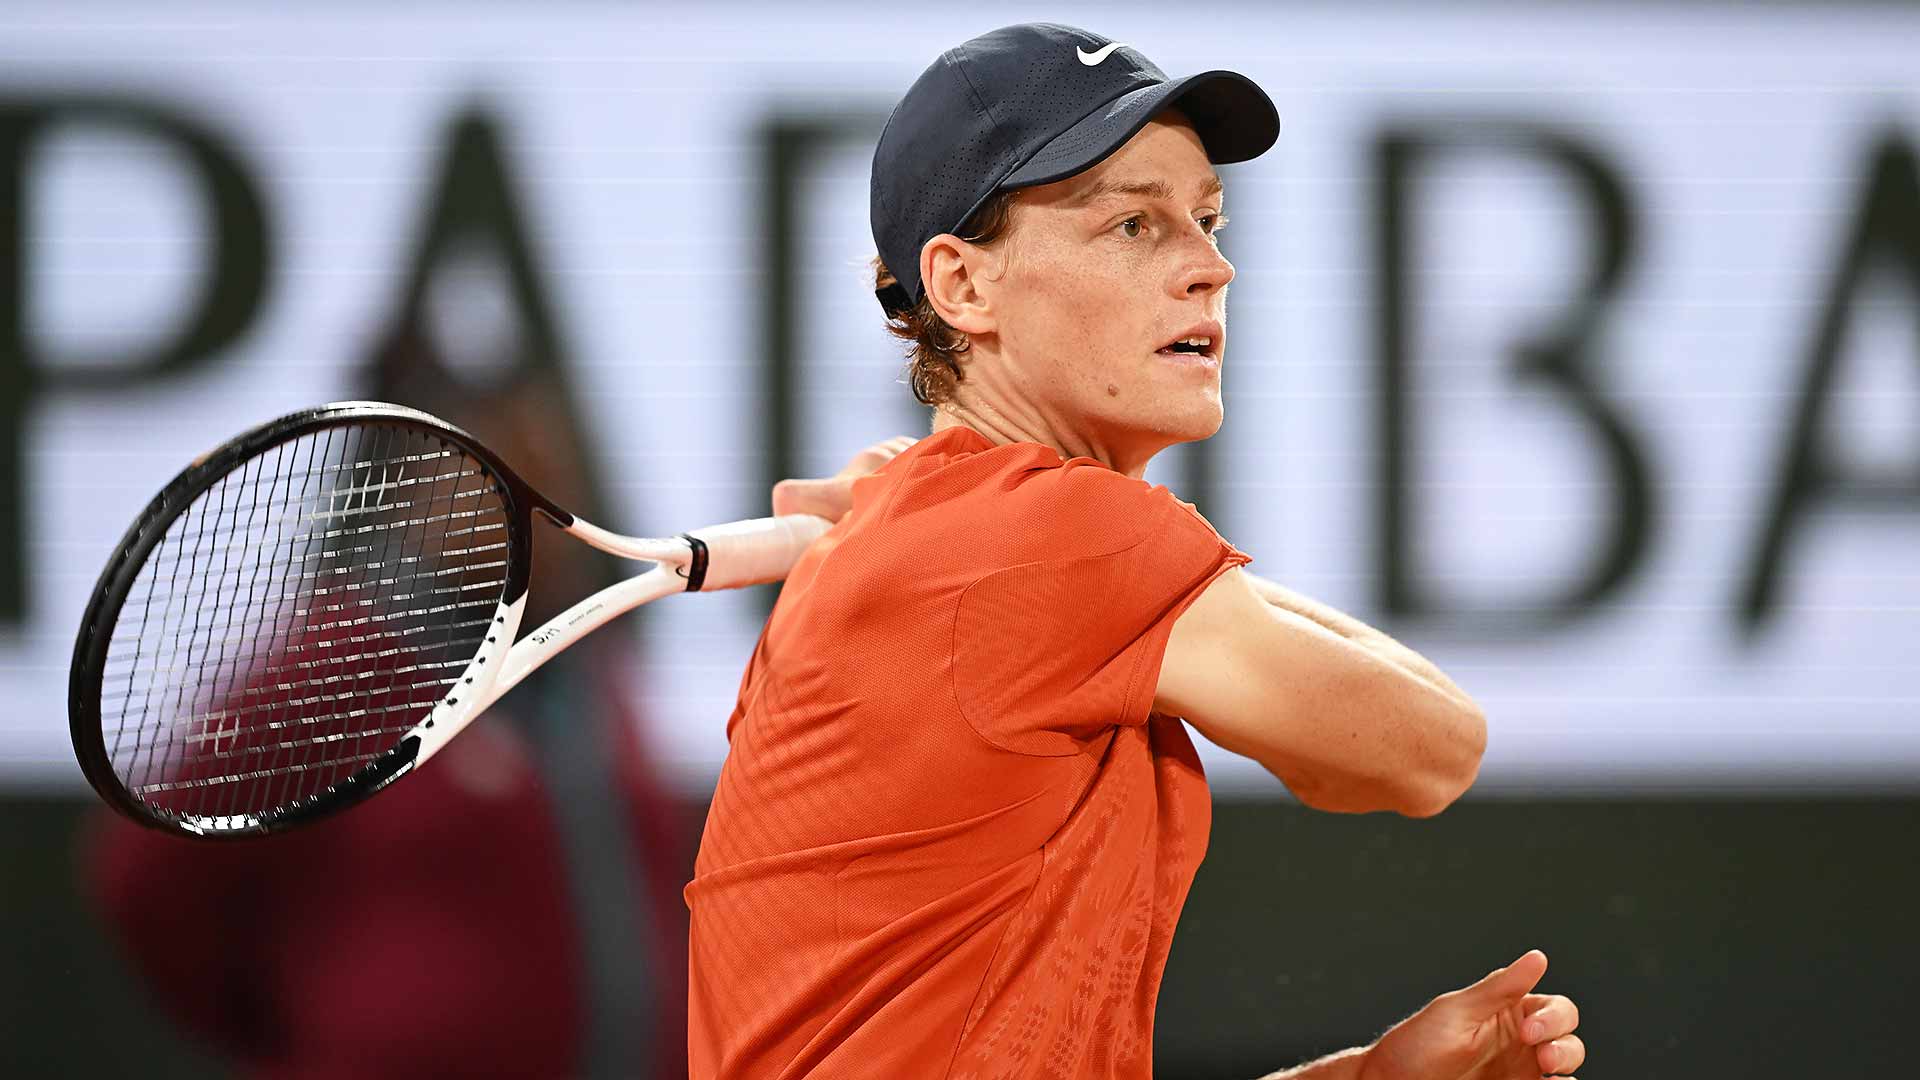 Sinner holds off Gasquet's late charge at Roland Garros